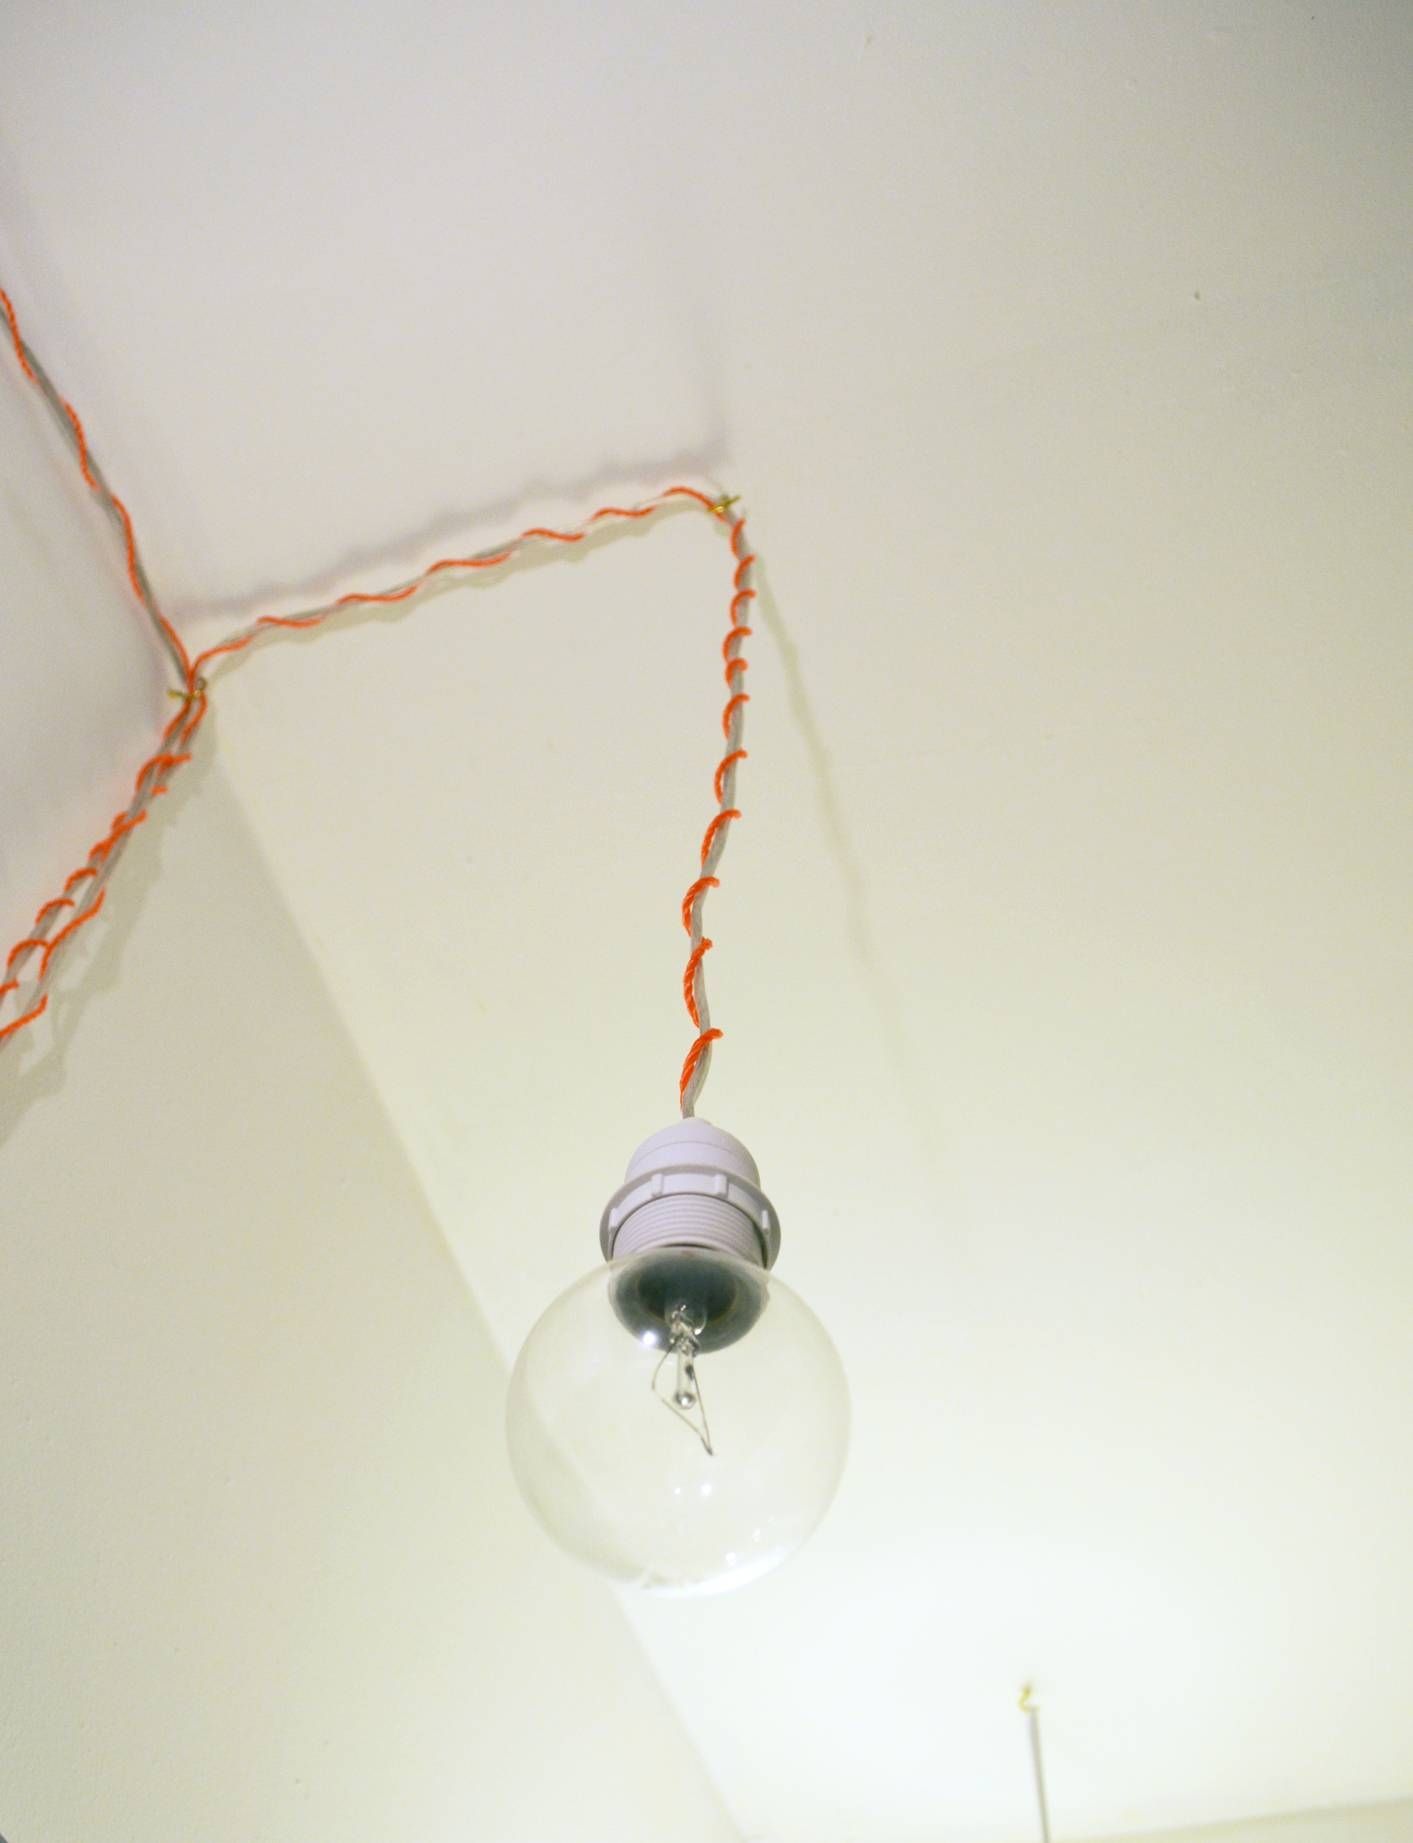 Twisted Pendant Light Diy Intended For Cord Cover Pendant Lights (View 3 of 15)